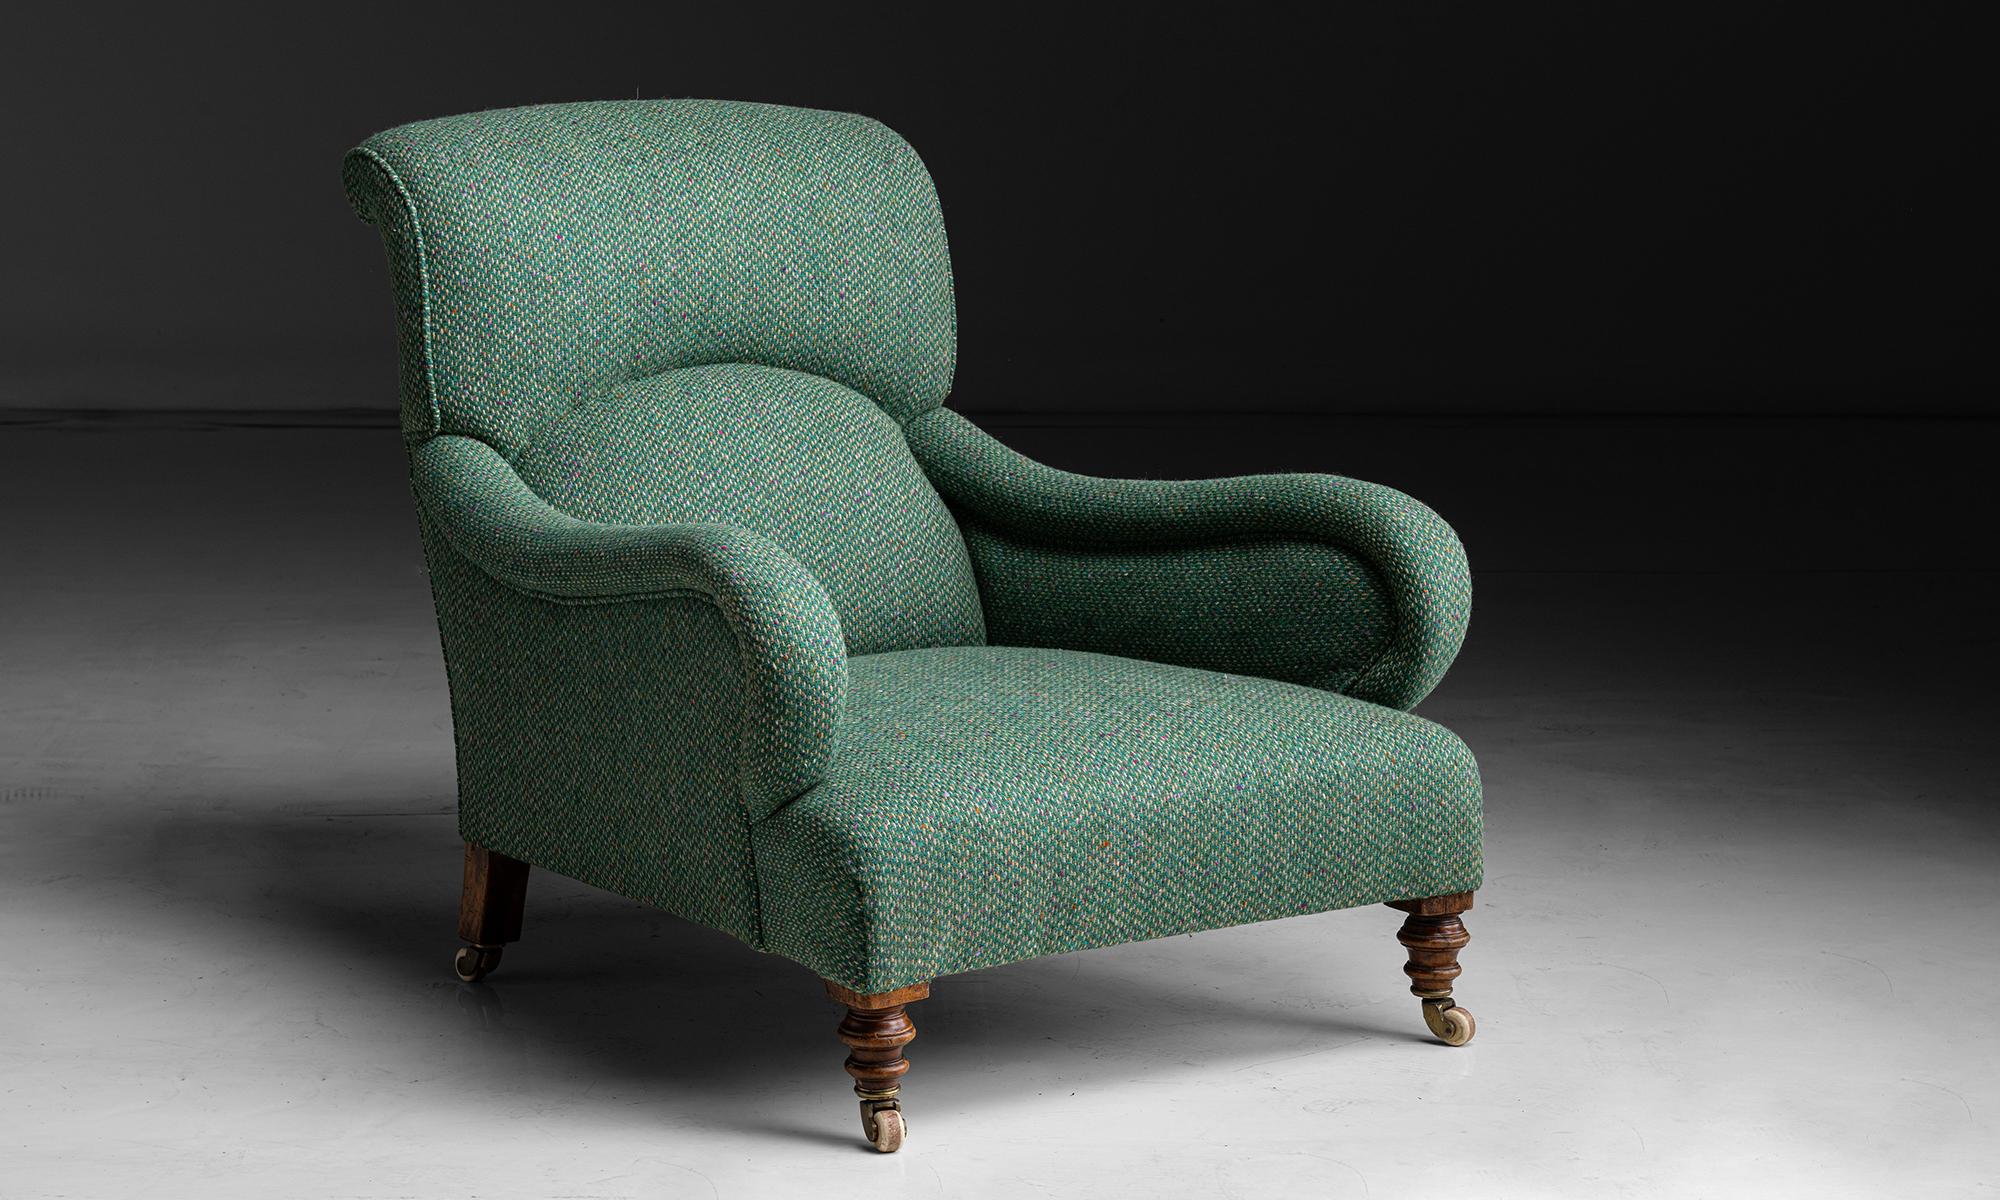 Deep Seated Armchair in Wool Tweed by Pierre Frey

England circa 1890

Victorian armchair newly upholstered, on original turned walnut legs with castors.

Measures 31”w x 40”d x 32”h x 11”seat